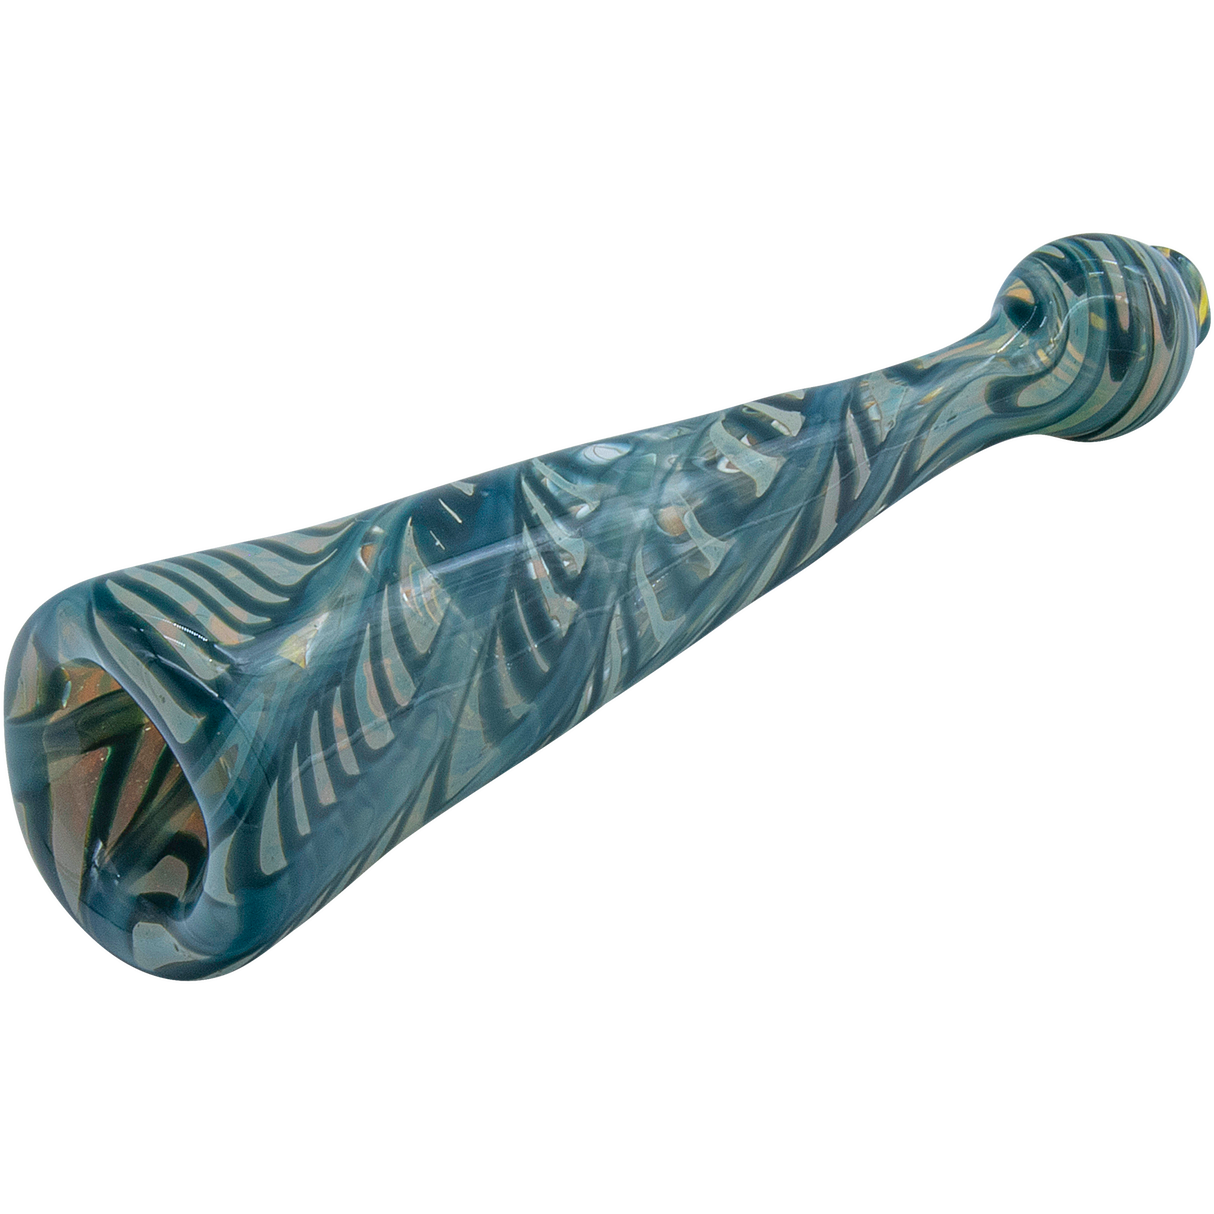 LA Pipes Typhoon Colored Chillum hand pipe in aqua, fumed color changing glass, 4.5" length, USA made.